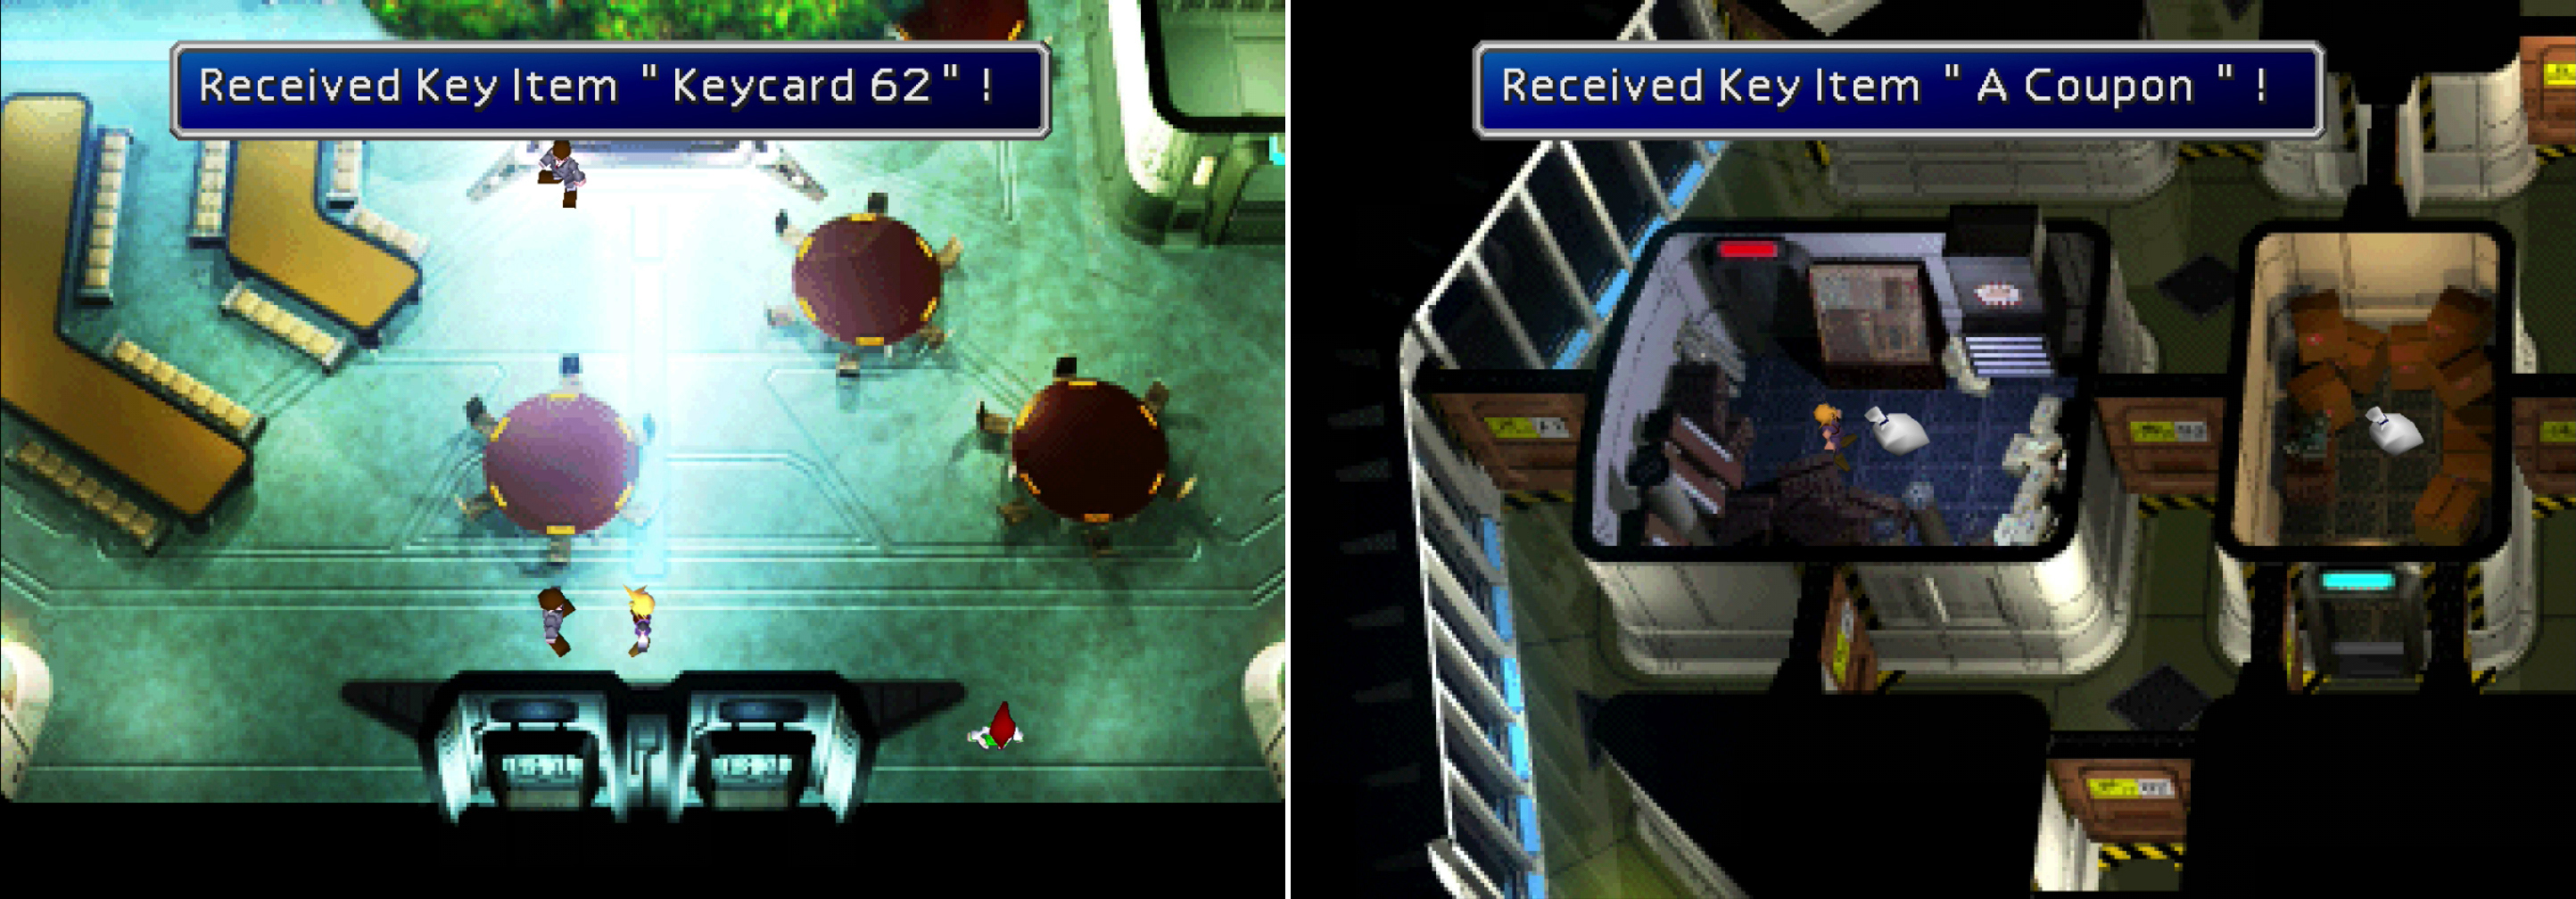 A misinformed Shinra employee will simply hand you his “Keycard 62” if you keep quiet (left). Disregard orders to stay out of the air ducts and claim all three prizes on the 63rd Floor (right).